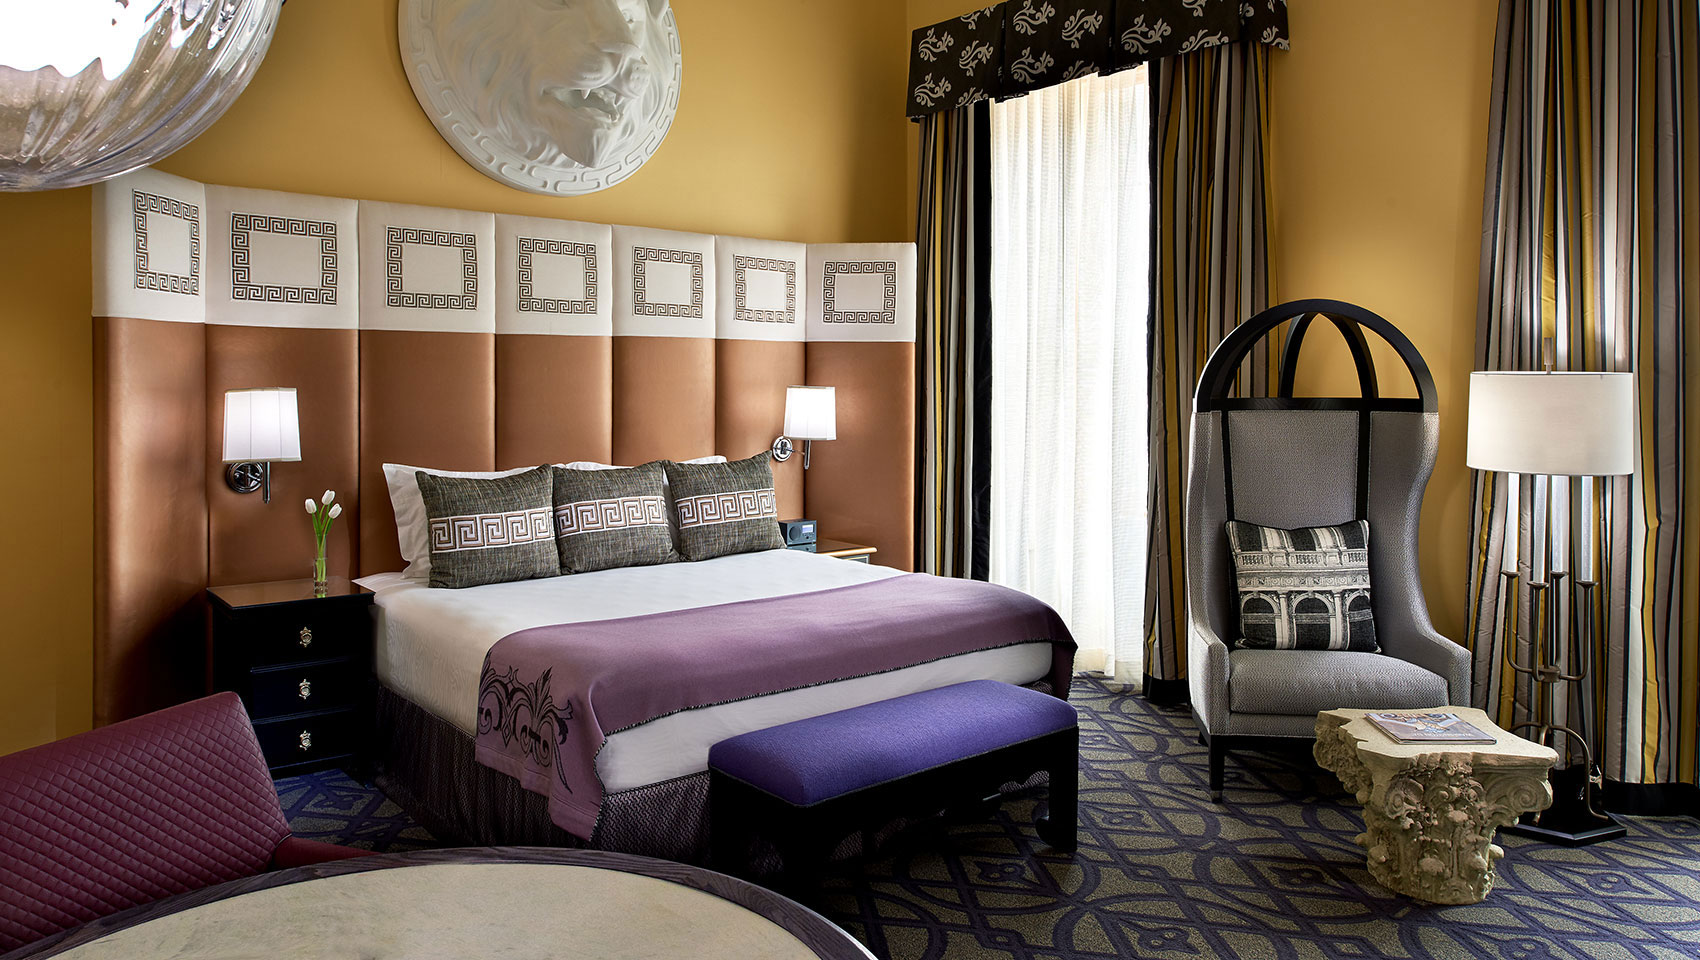 Educators get special rates at Kimpton Hotels and other IHG hotel properties.